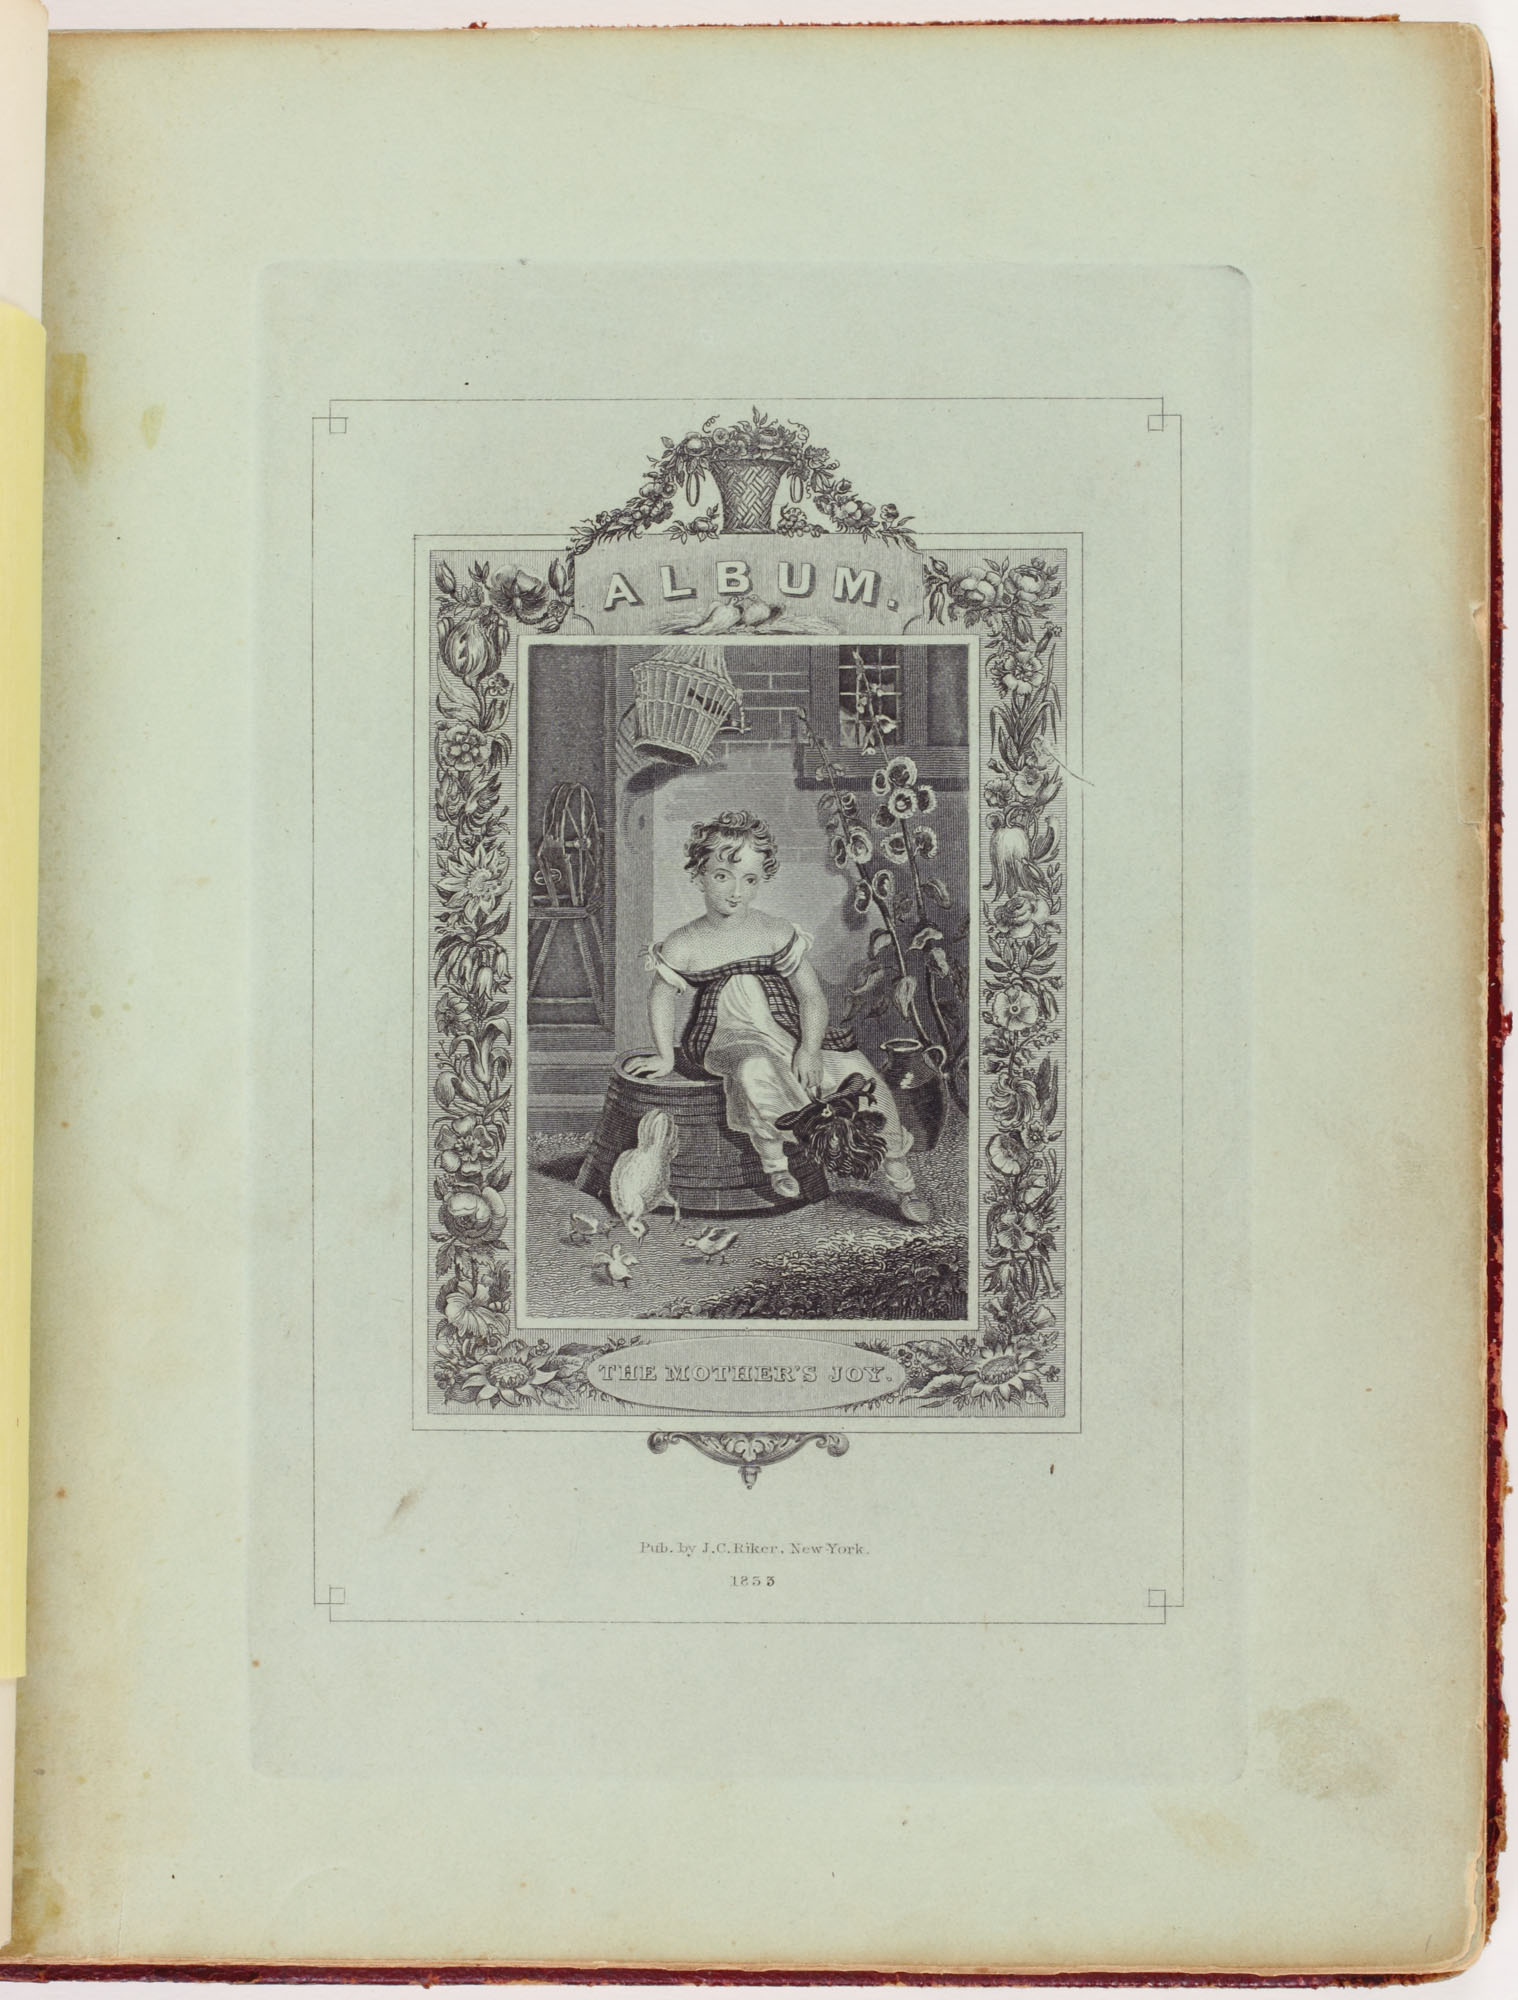 Fig. 4 The Mother’s Joy (New York: J.C. Riker, 1833) in Mary Anne Dickerson Album, 1833-1882, p. 2. Engraving. Library Company of Philadelphia.